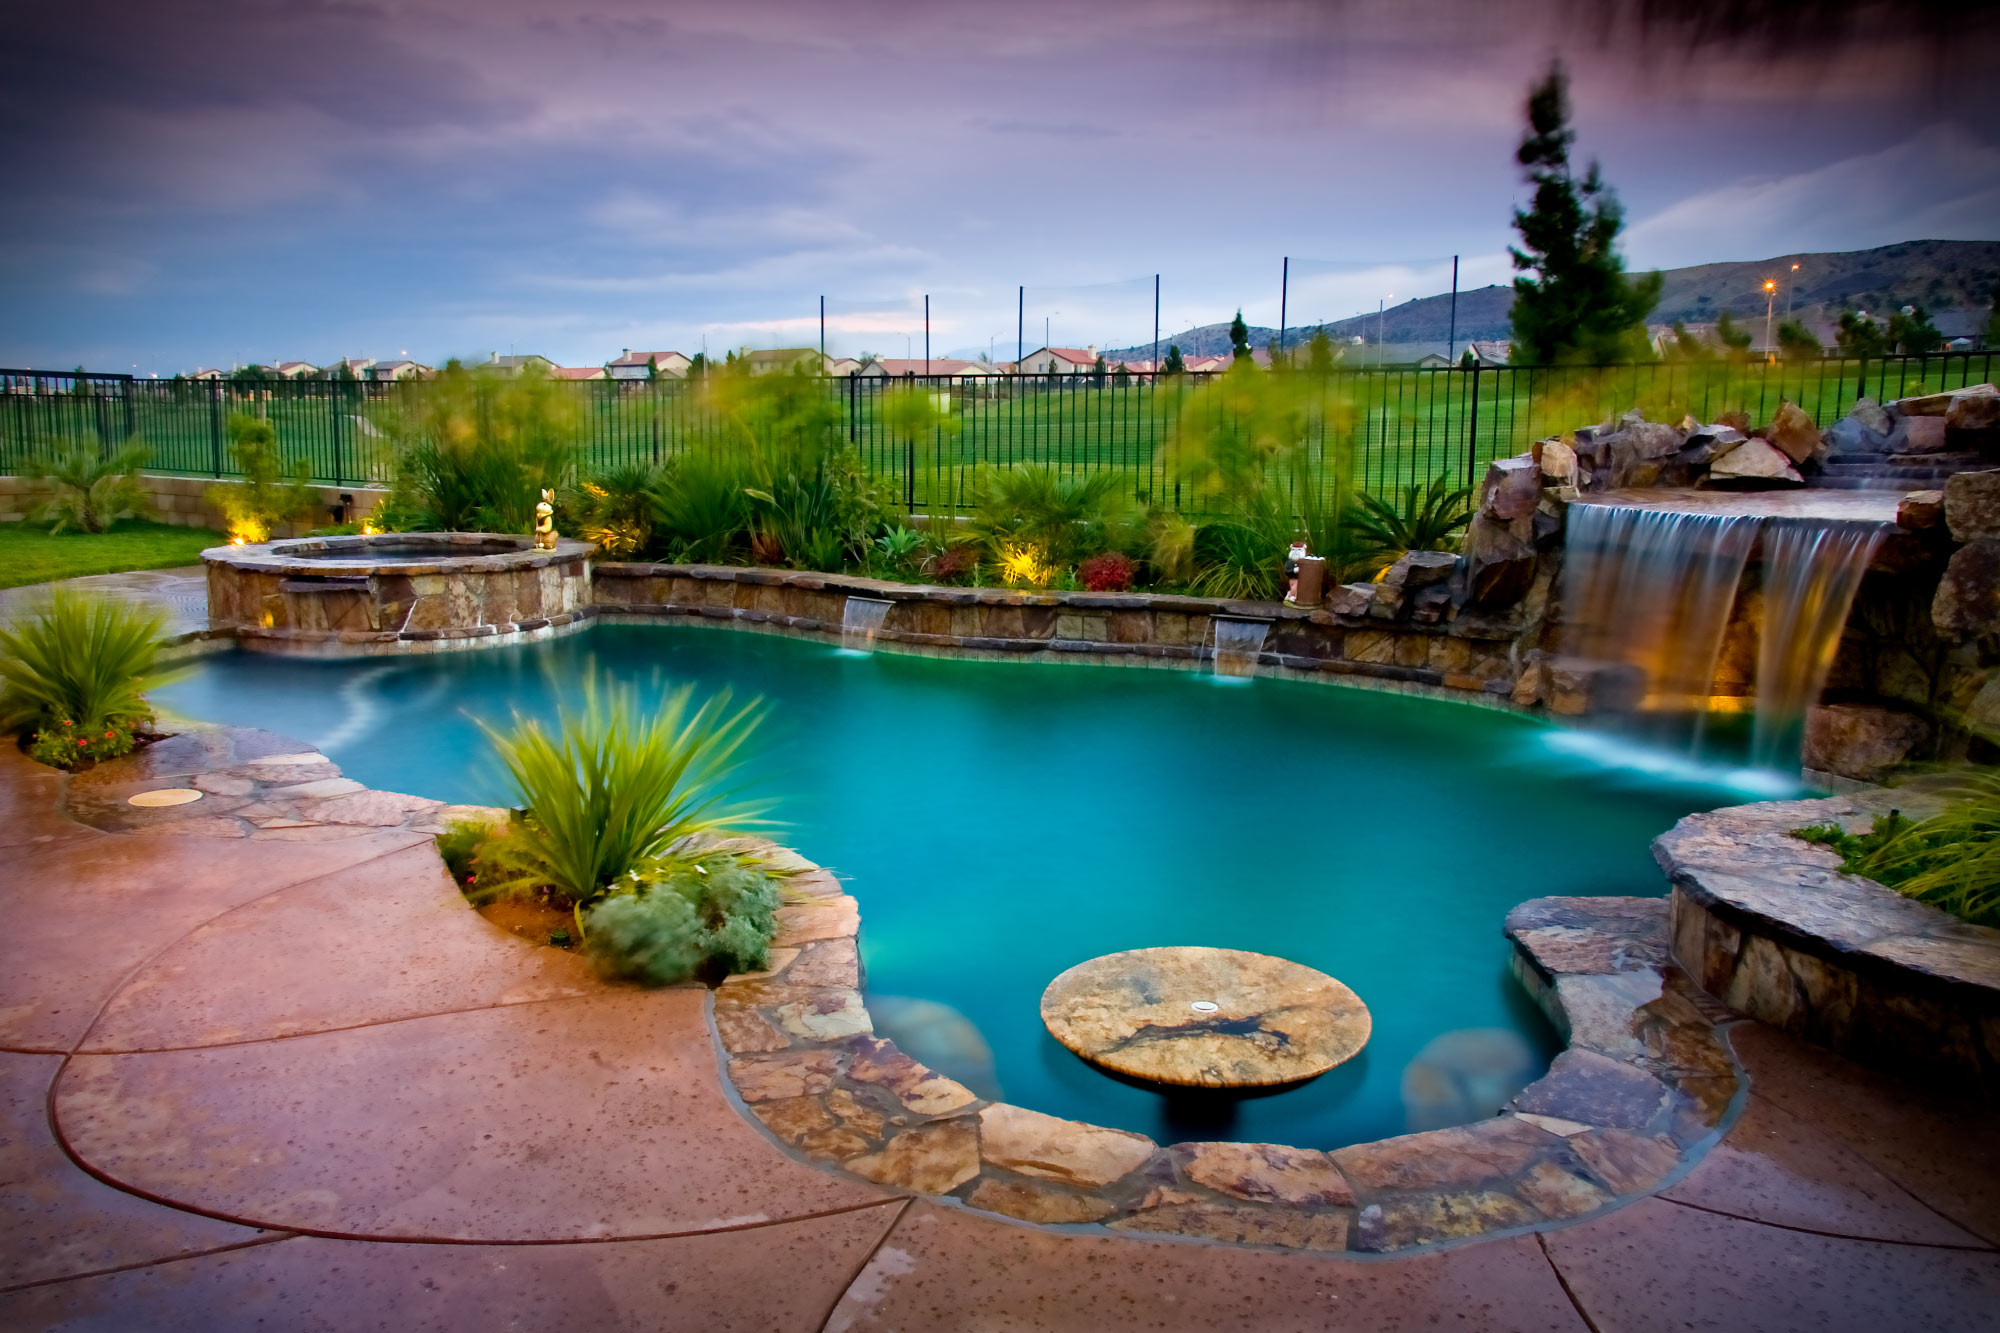 Backyard Pools : 24+ Small Swimming Pool Designs, Decorating Ideas | Design / Now we have